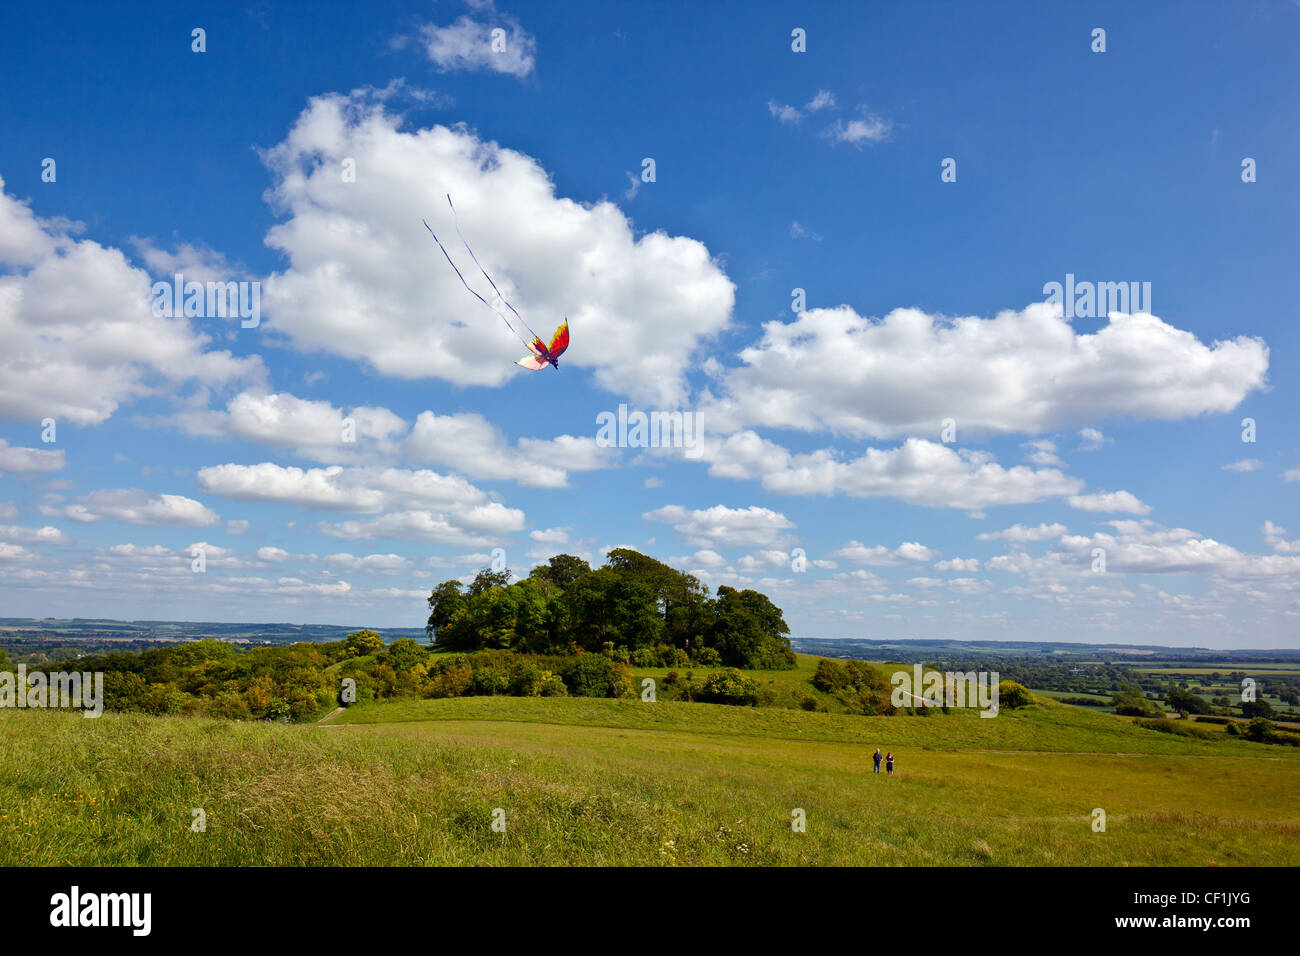 Kite flying at Whittenham Clumps in the Thames Valley. Stock Photo